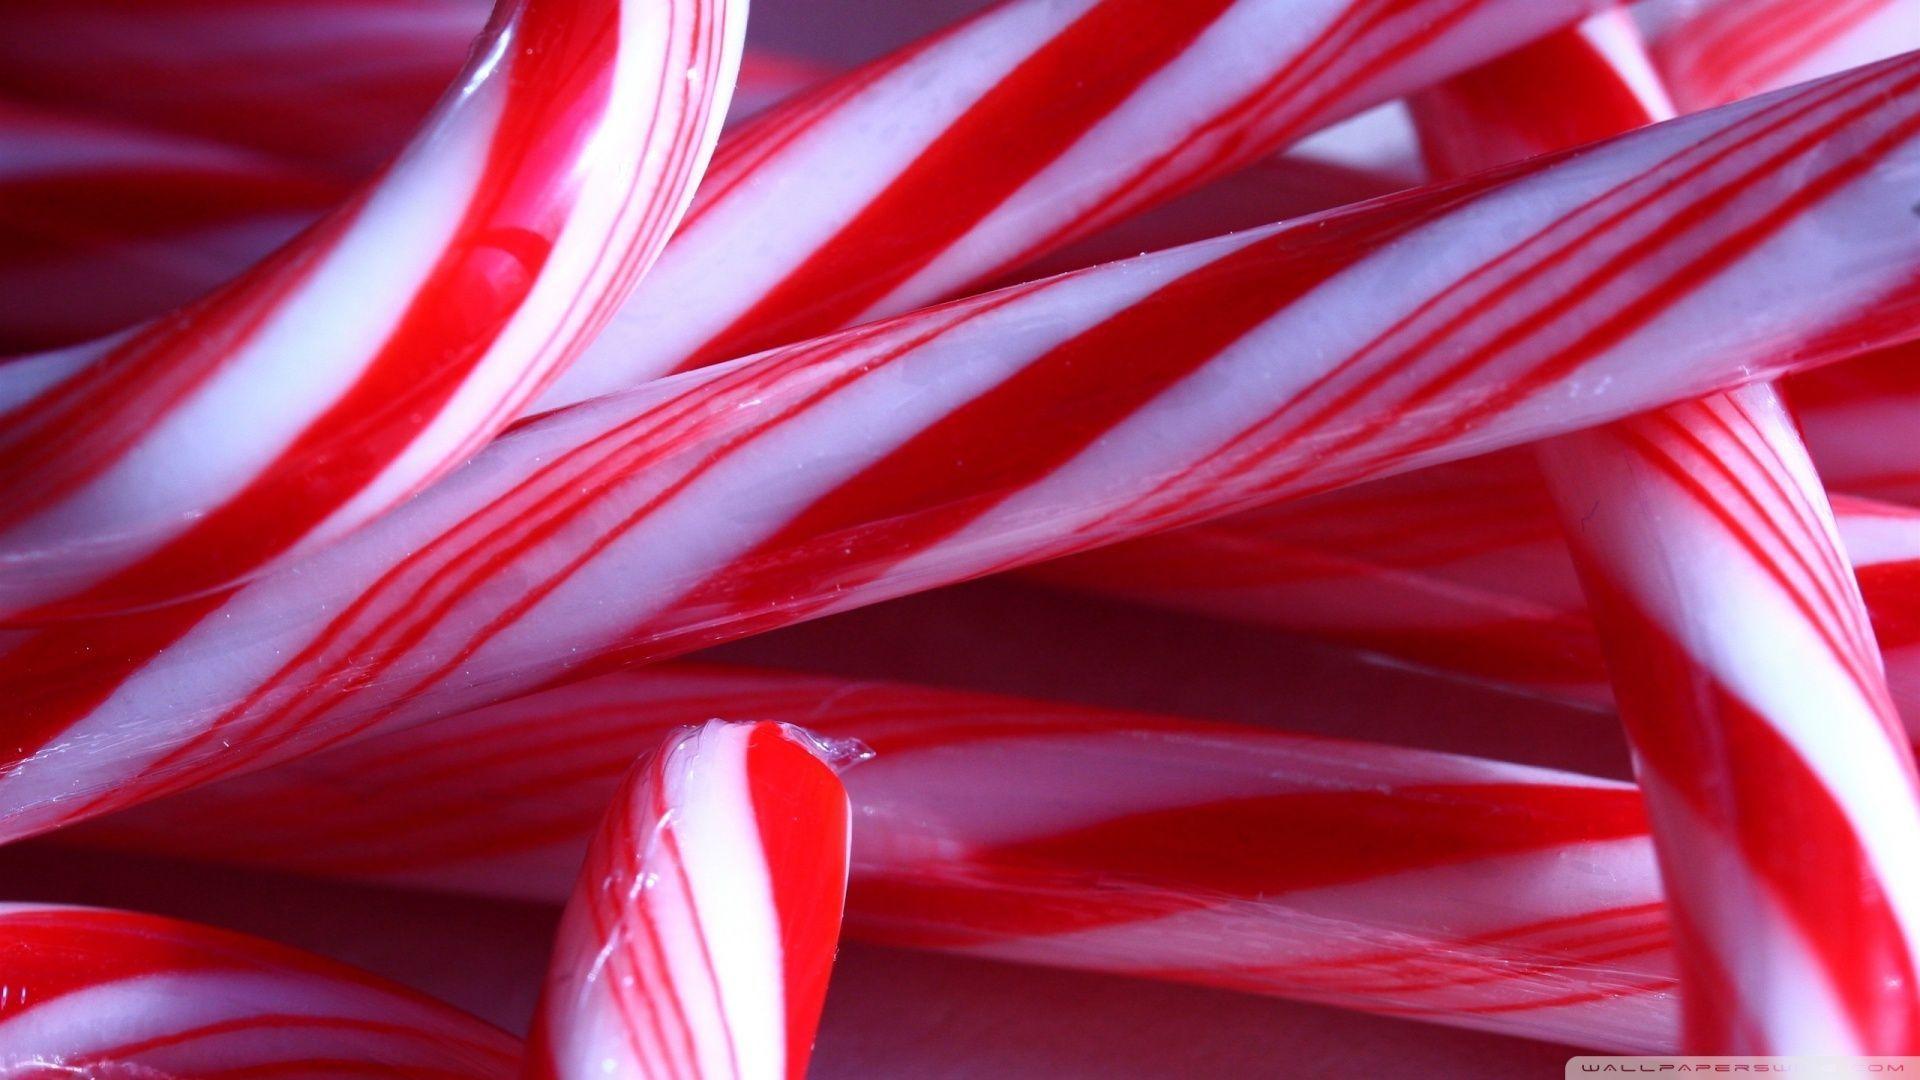 Download Candy Canes Wallpaper 1920x1080